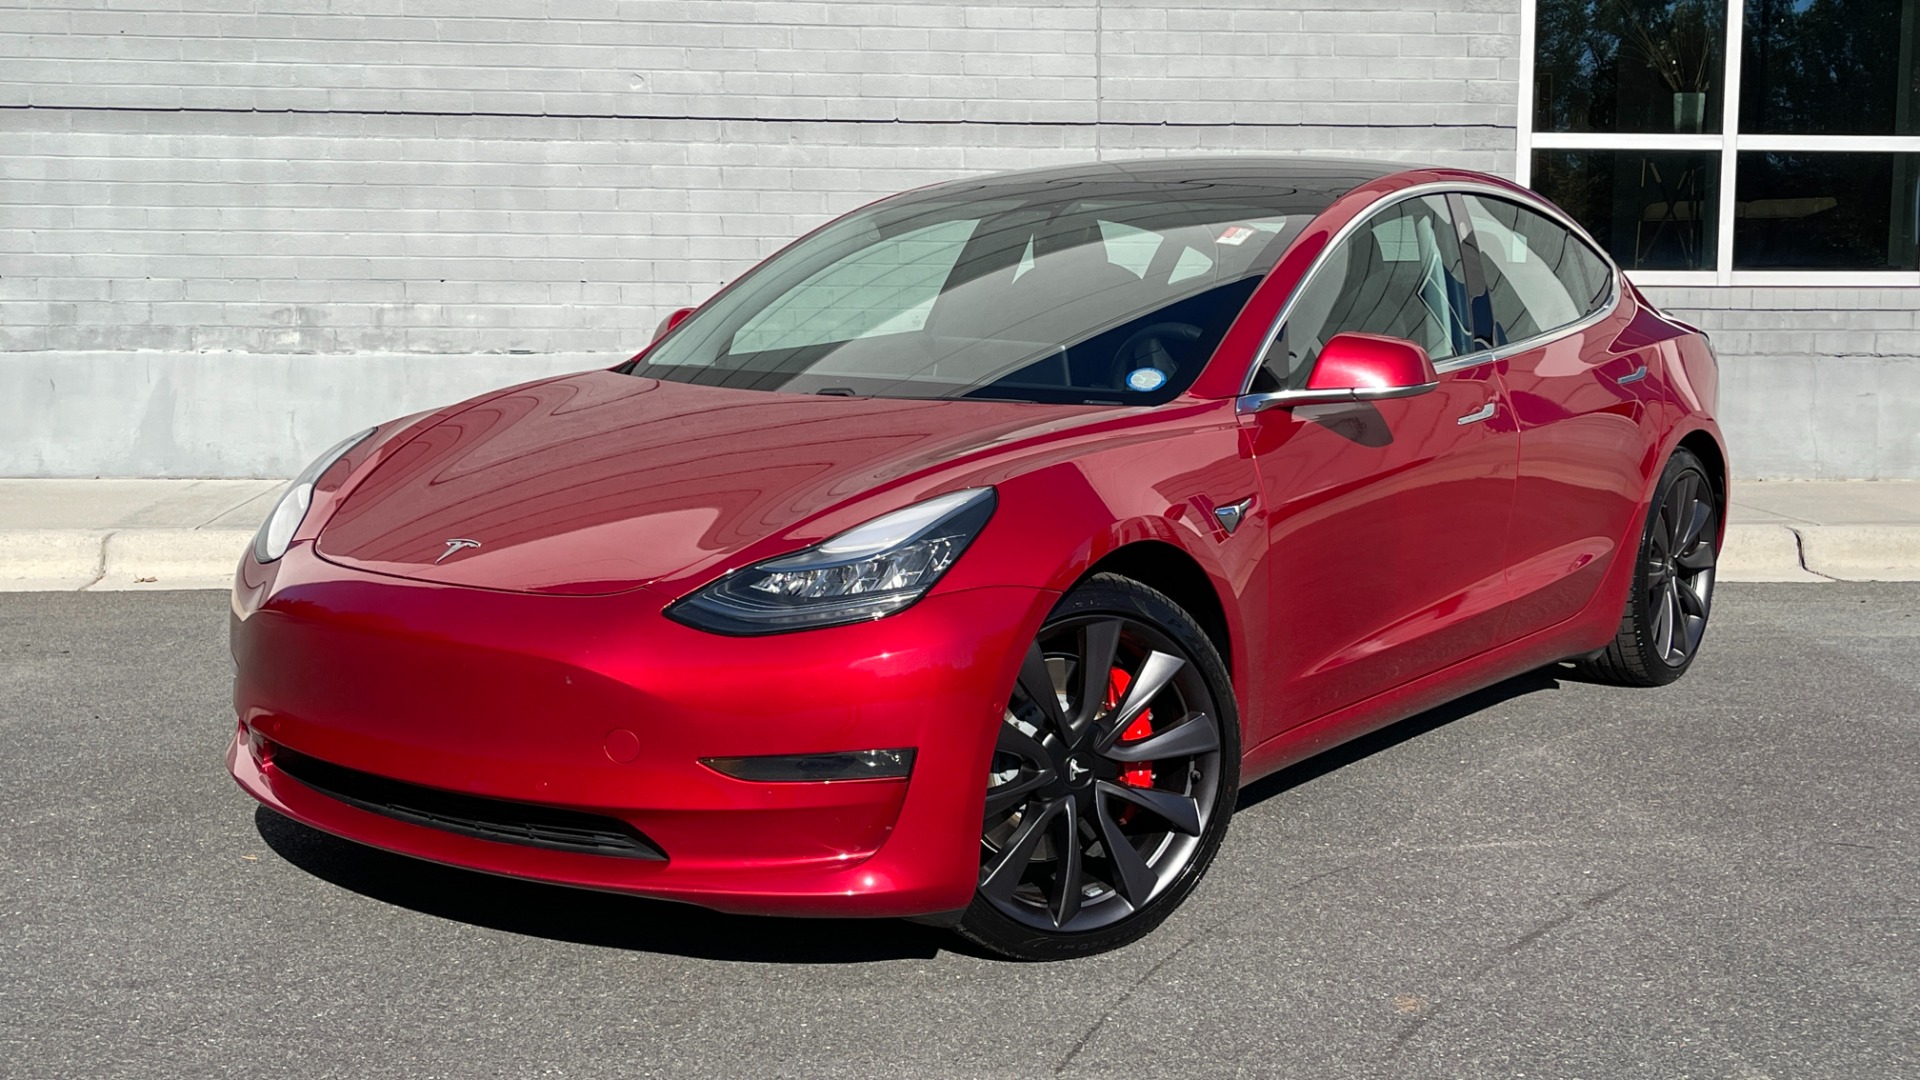 Used 2020 Tesla Model 3 PERFORMANCE / 20IN WHEELS / PERFORMANCE BRAKES / CARBON FIBER TRIM for sale $43,995 at Formula Imports in Charlotte NC 28227 1